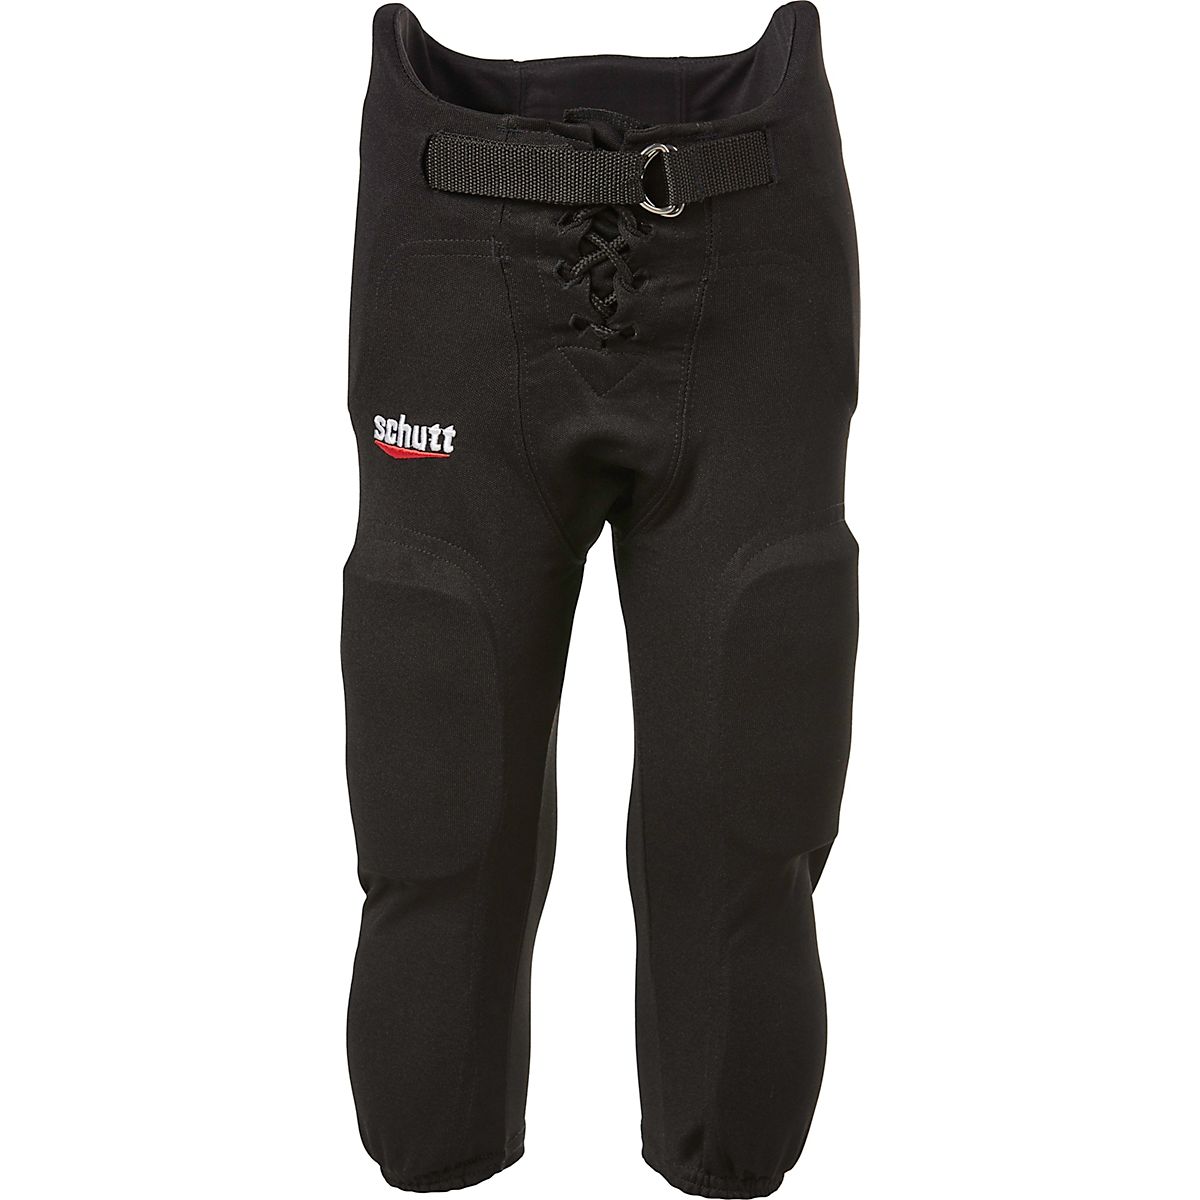 Schutt Sports All-in-One Poly Knit Varsity Football Pant